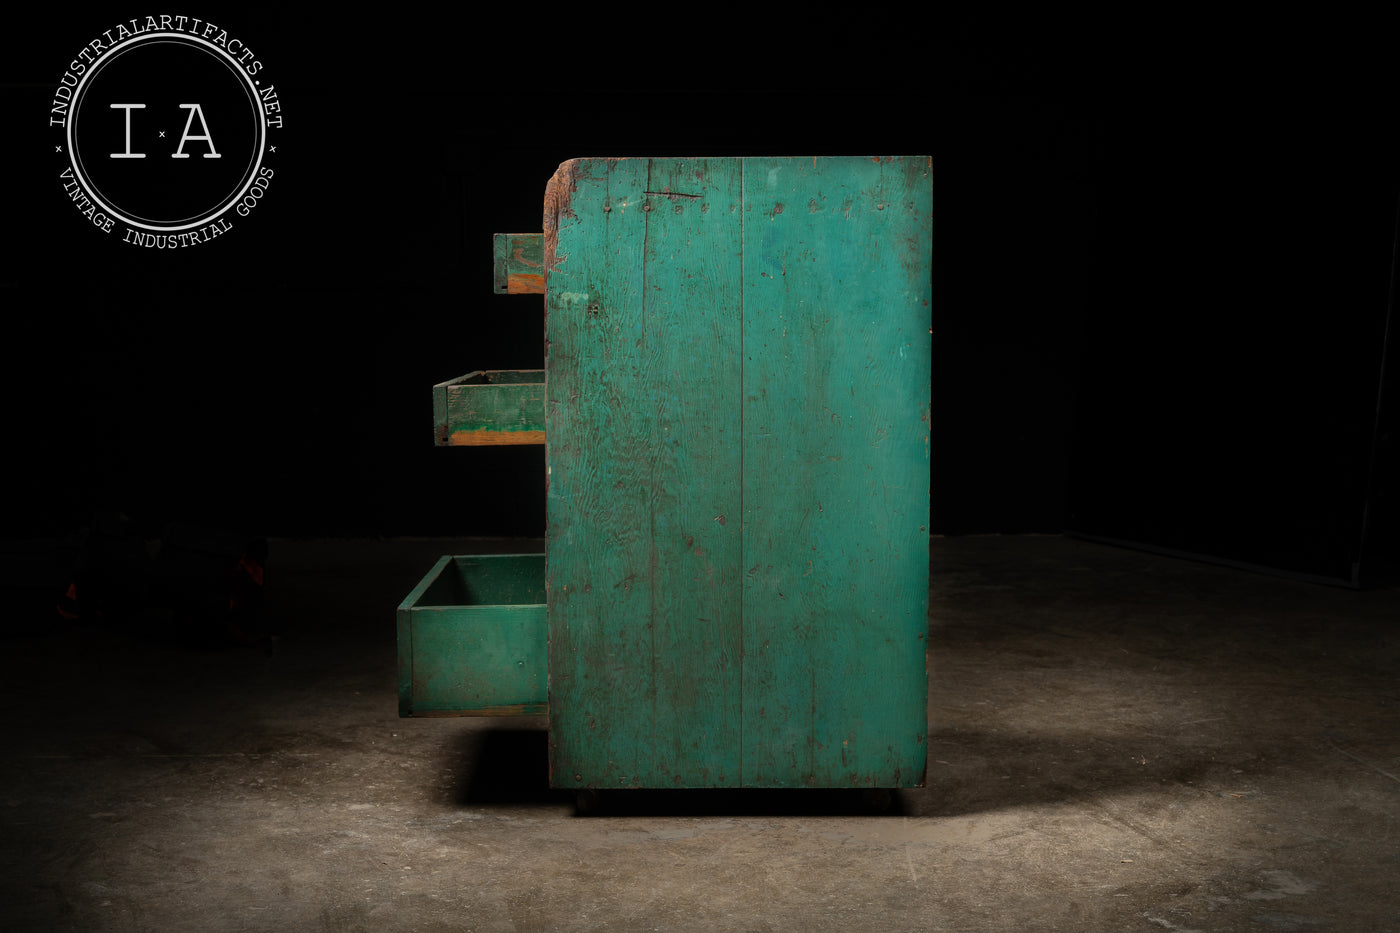 Green Industrial Parts Cabinet